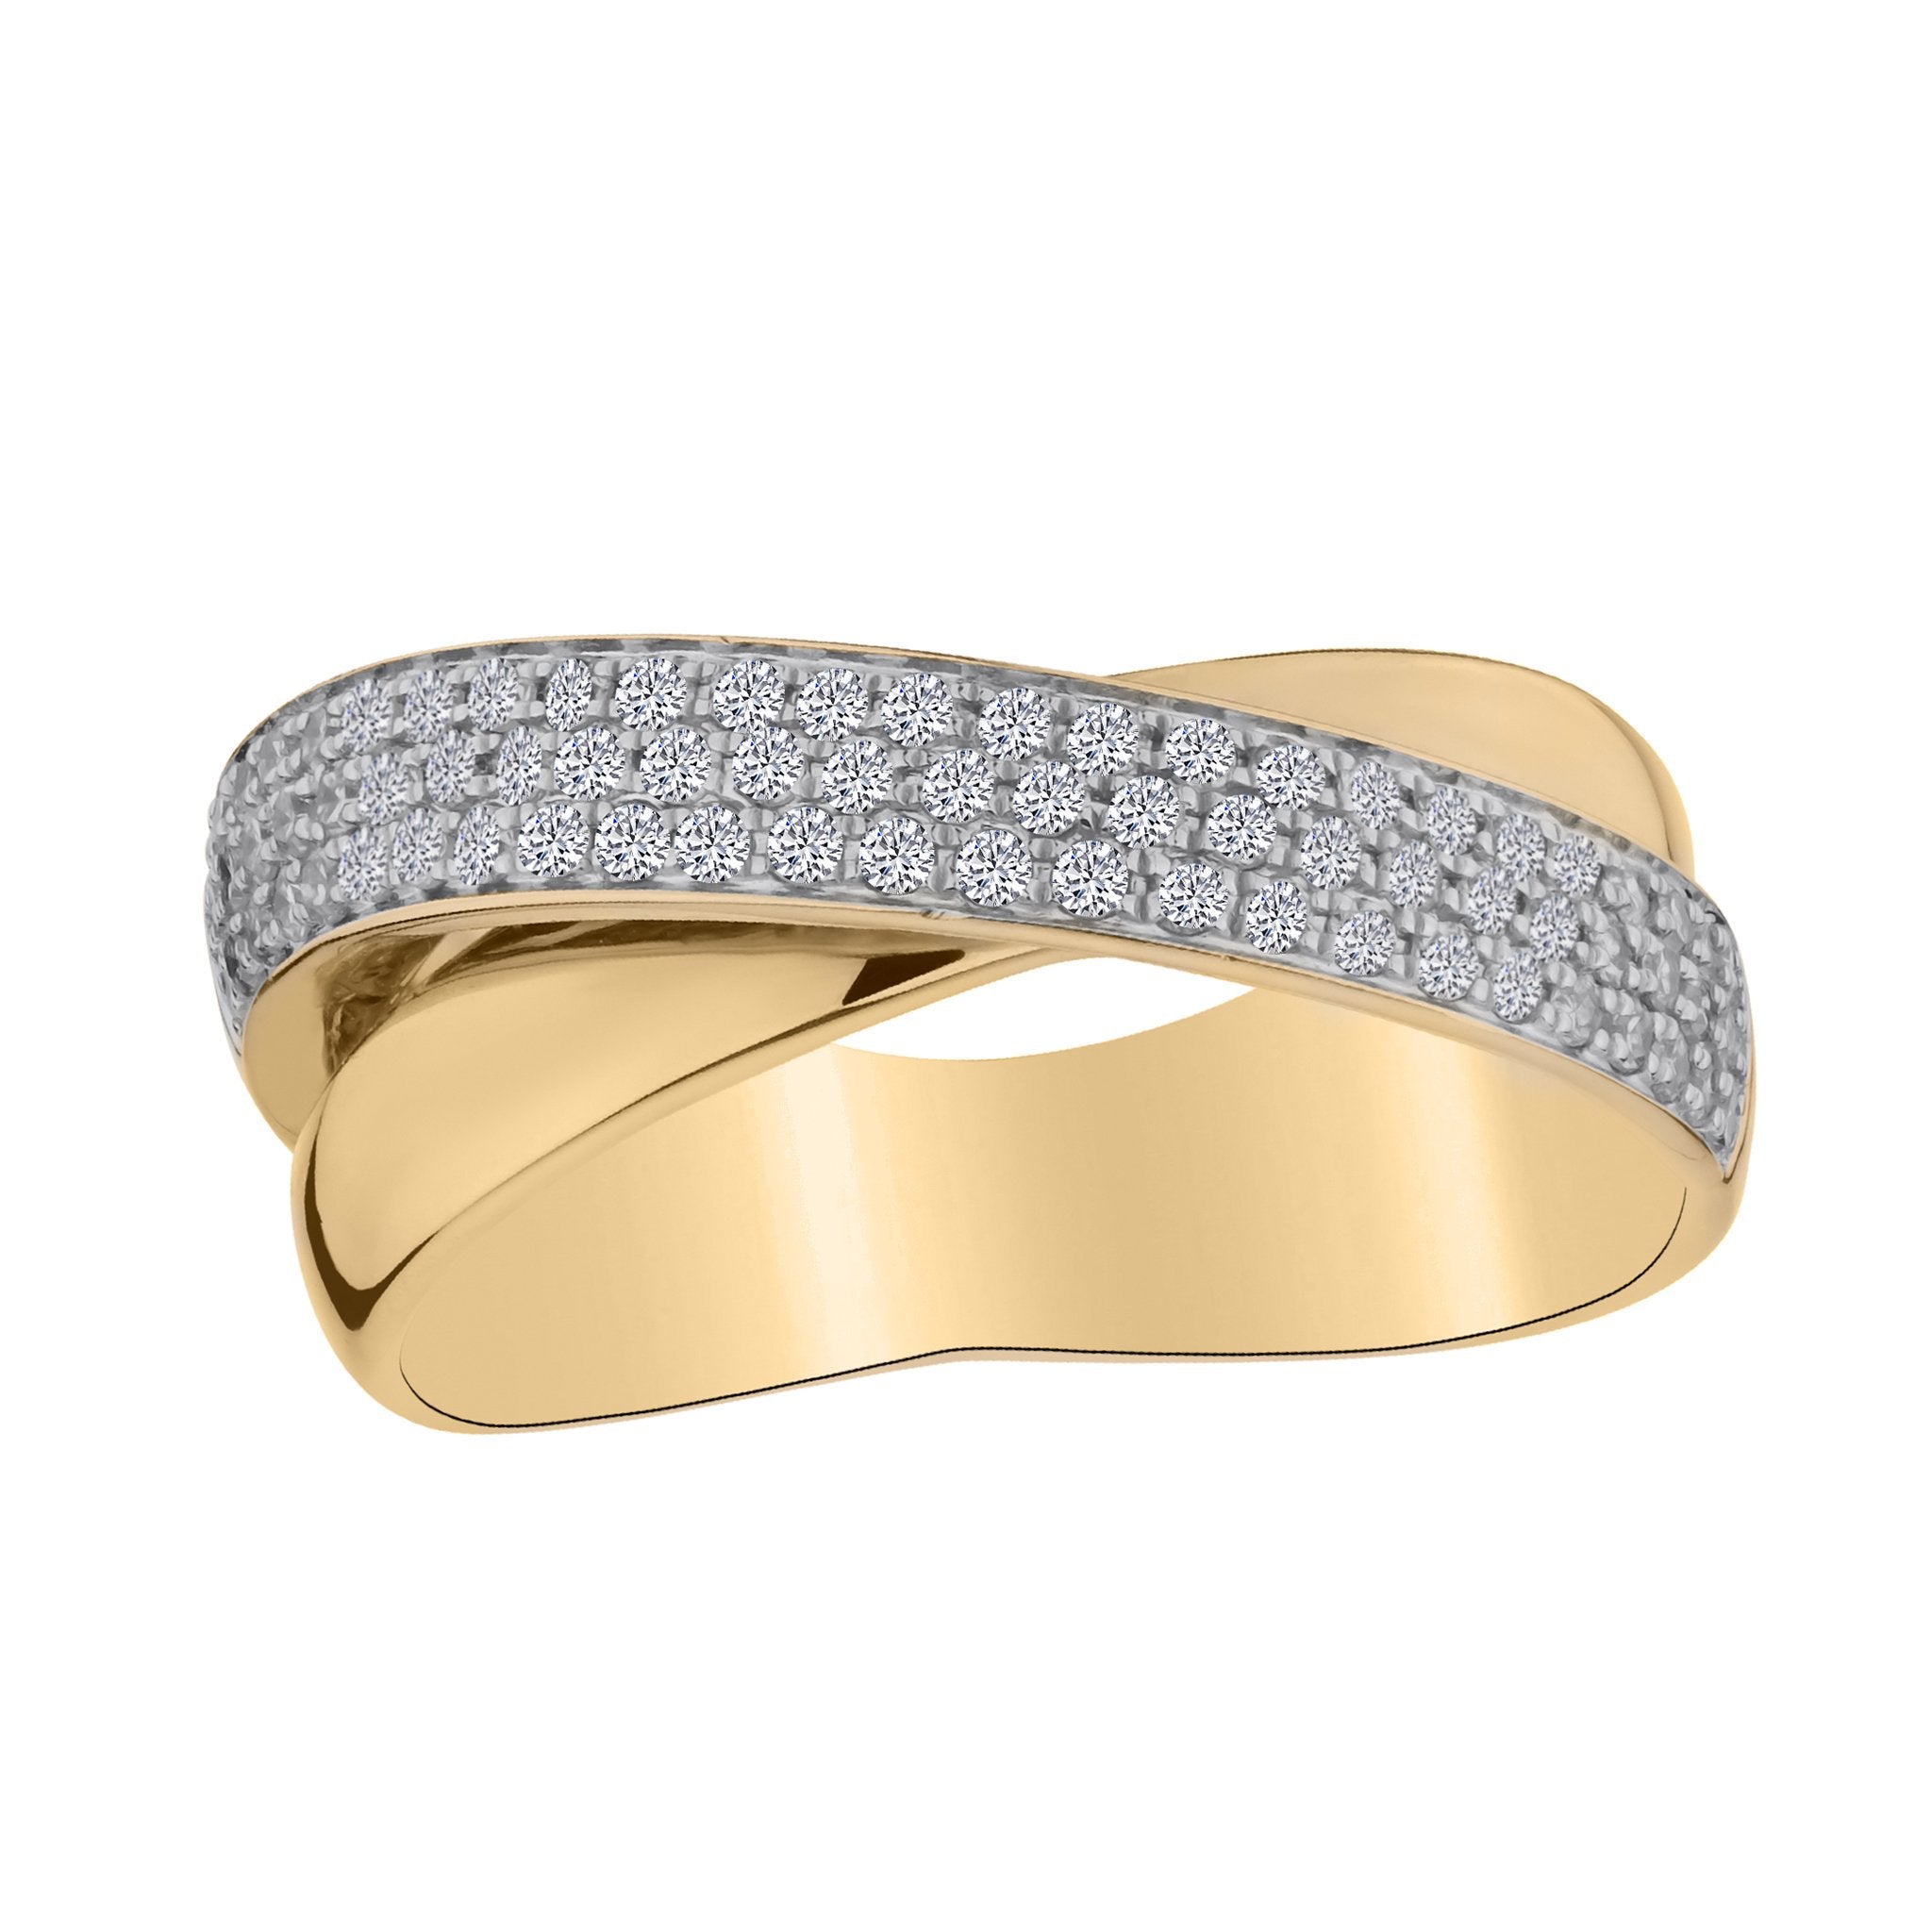 .65 CARAT DIAMOND RING, 14kt YELLOW GOLD. Fashion Rings - Griffin Jewellery Designs